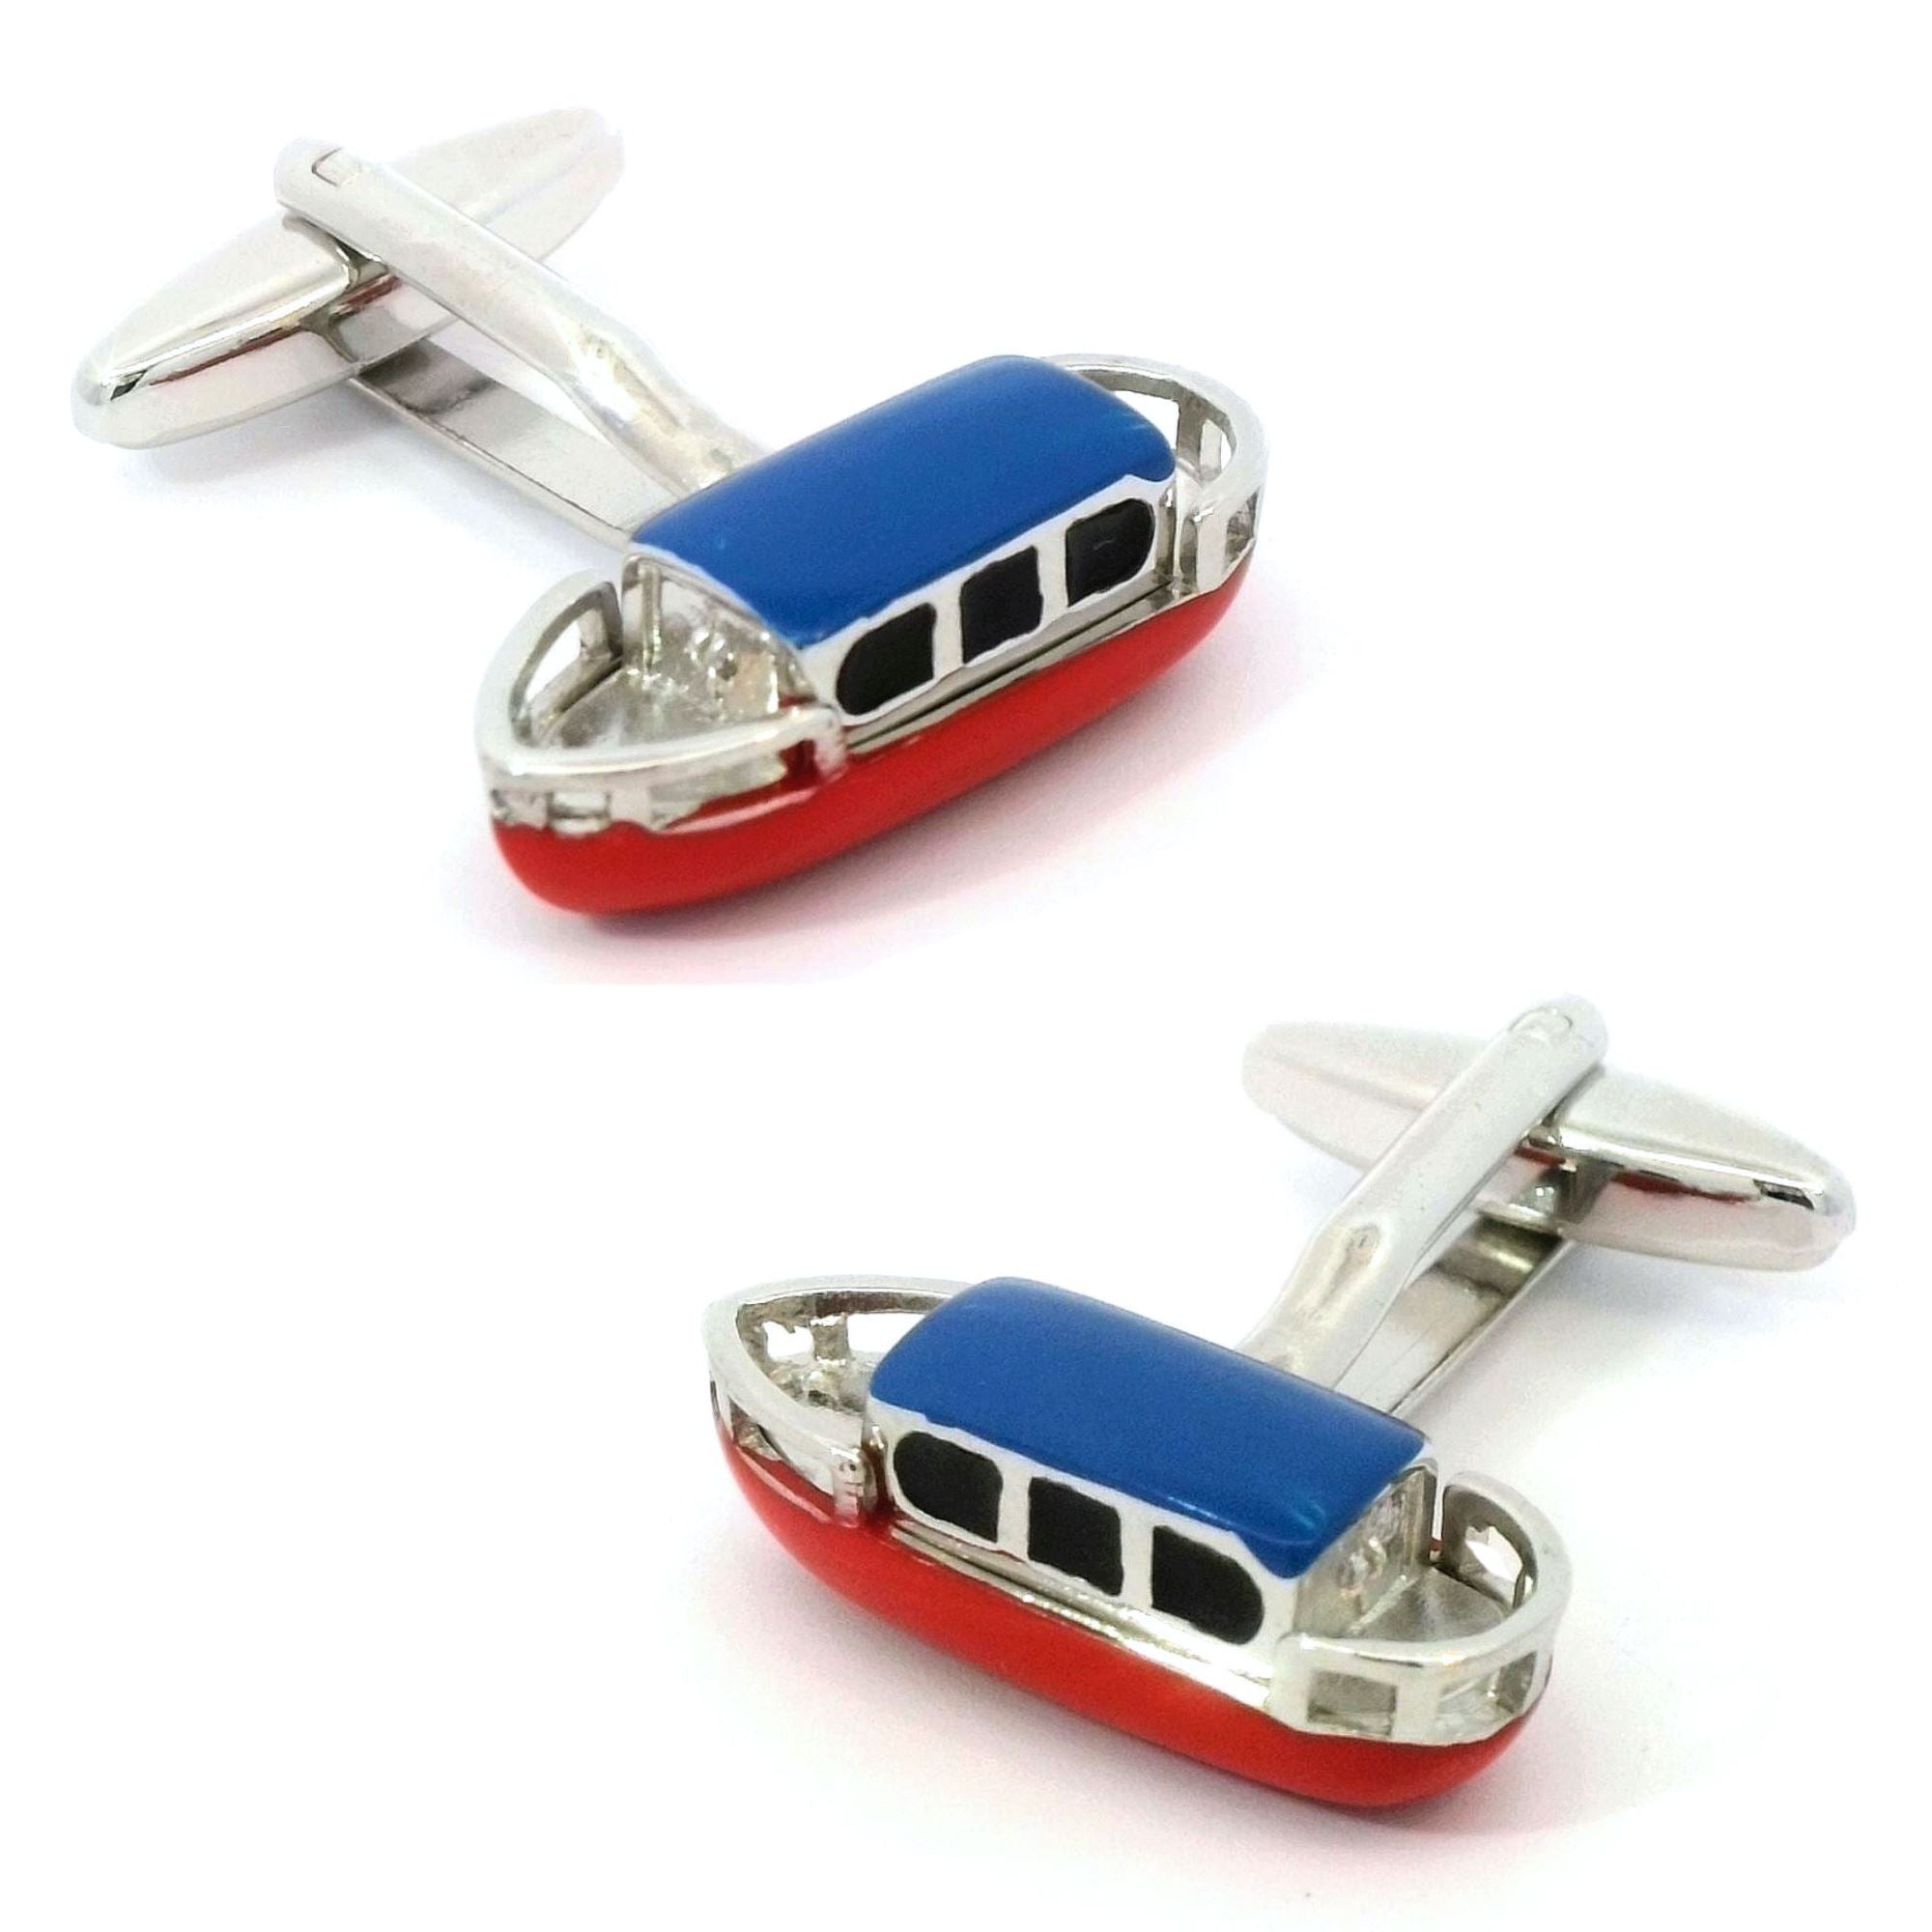 Coloured Canal Barge or Narrowboat Cufflinks Novelty Cufflinks Clinks Australia Coloured Canal Barge or Narrowboat Cufflinks 